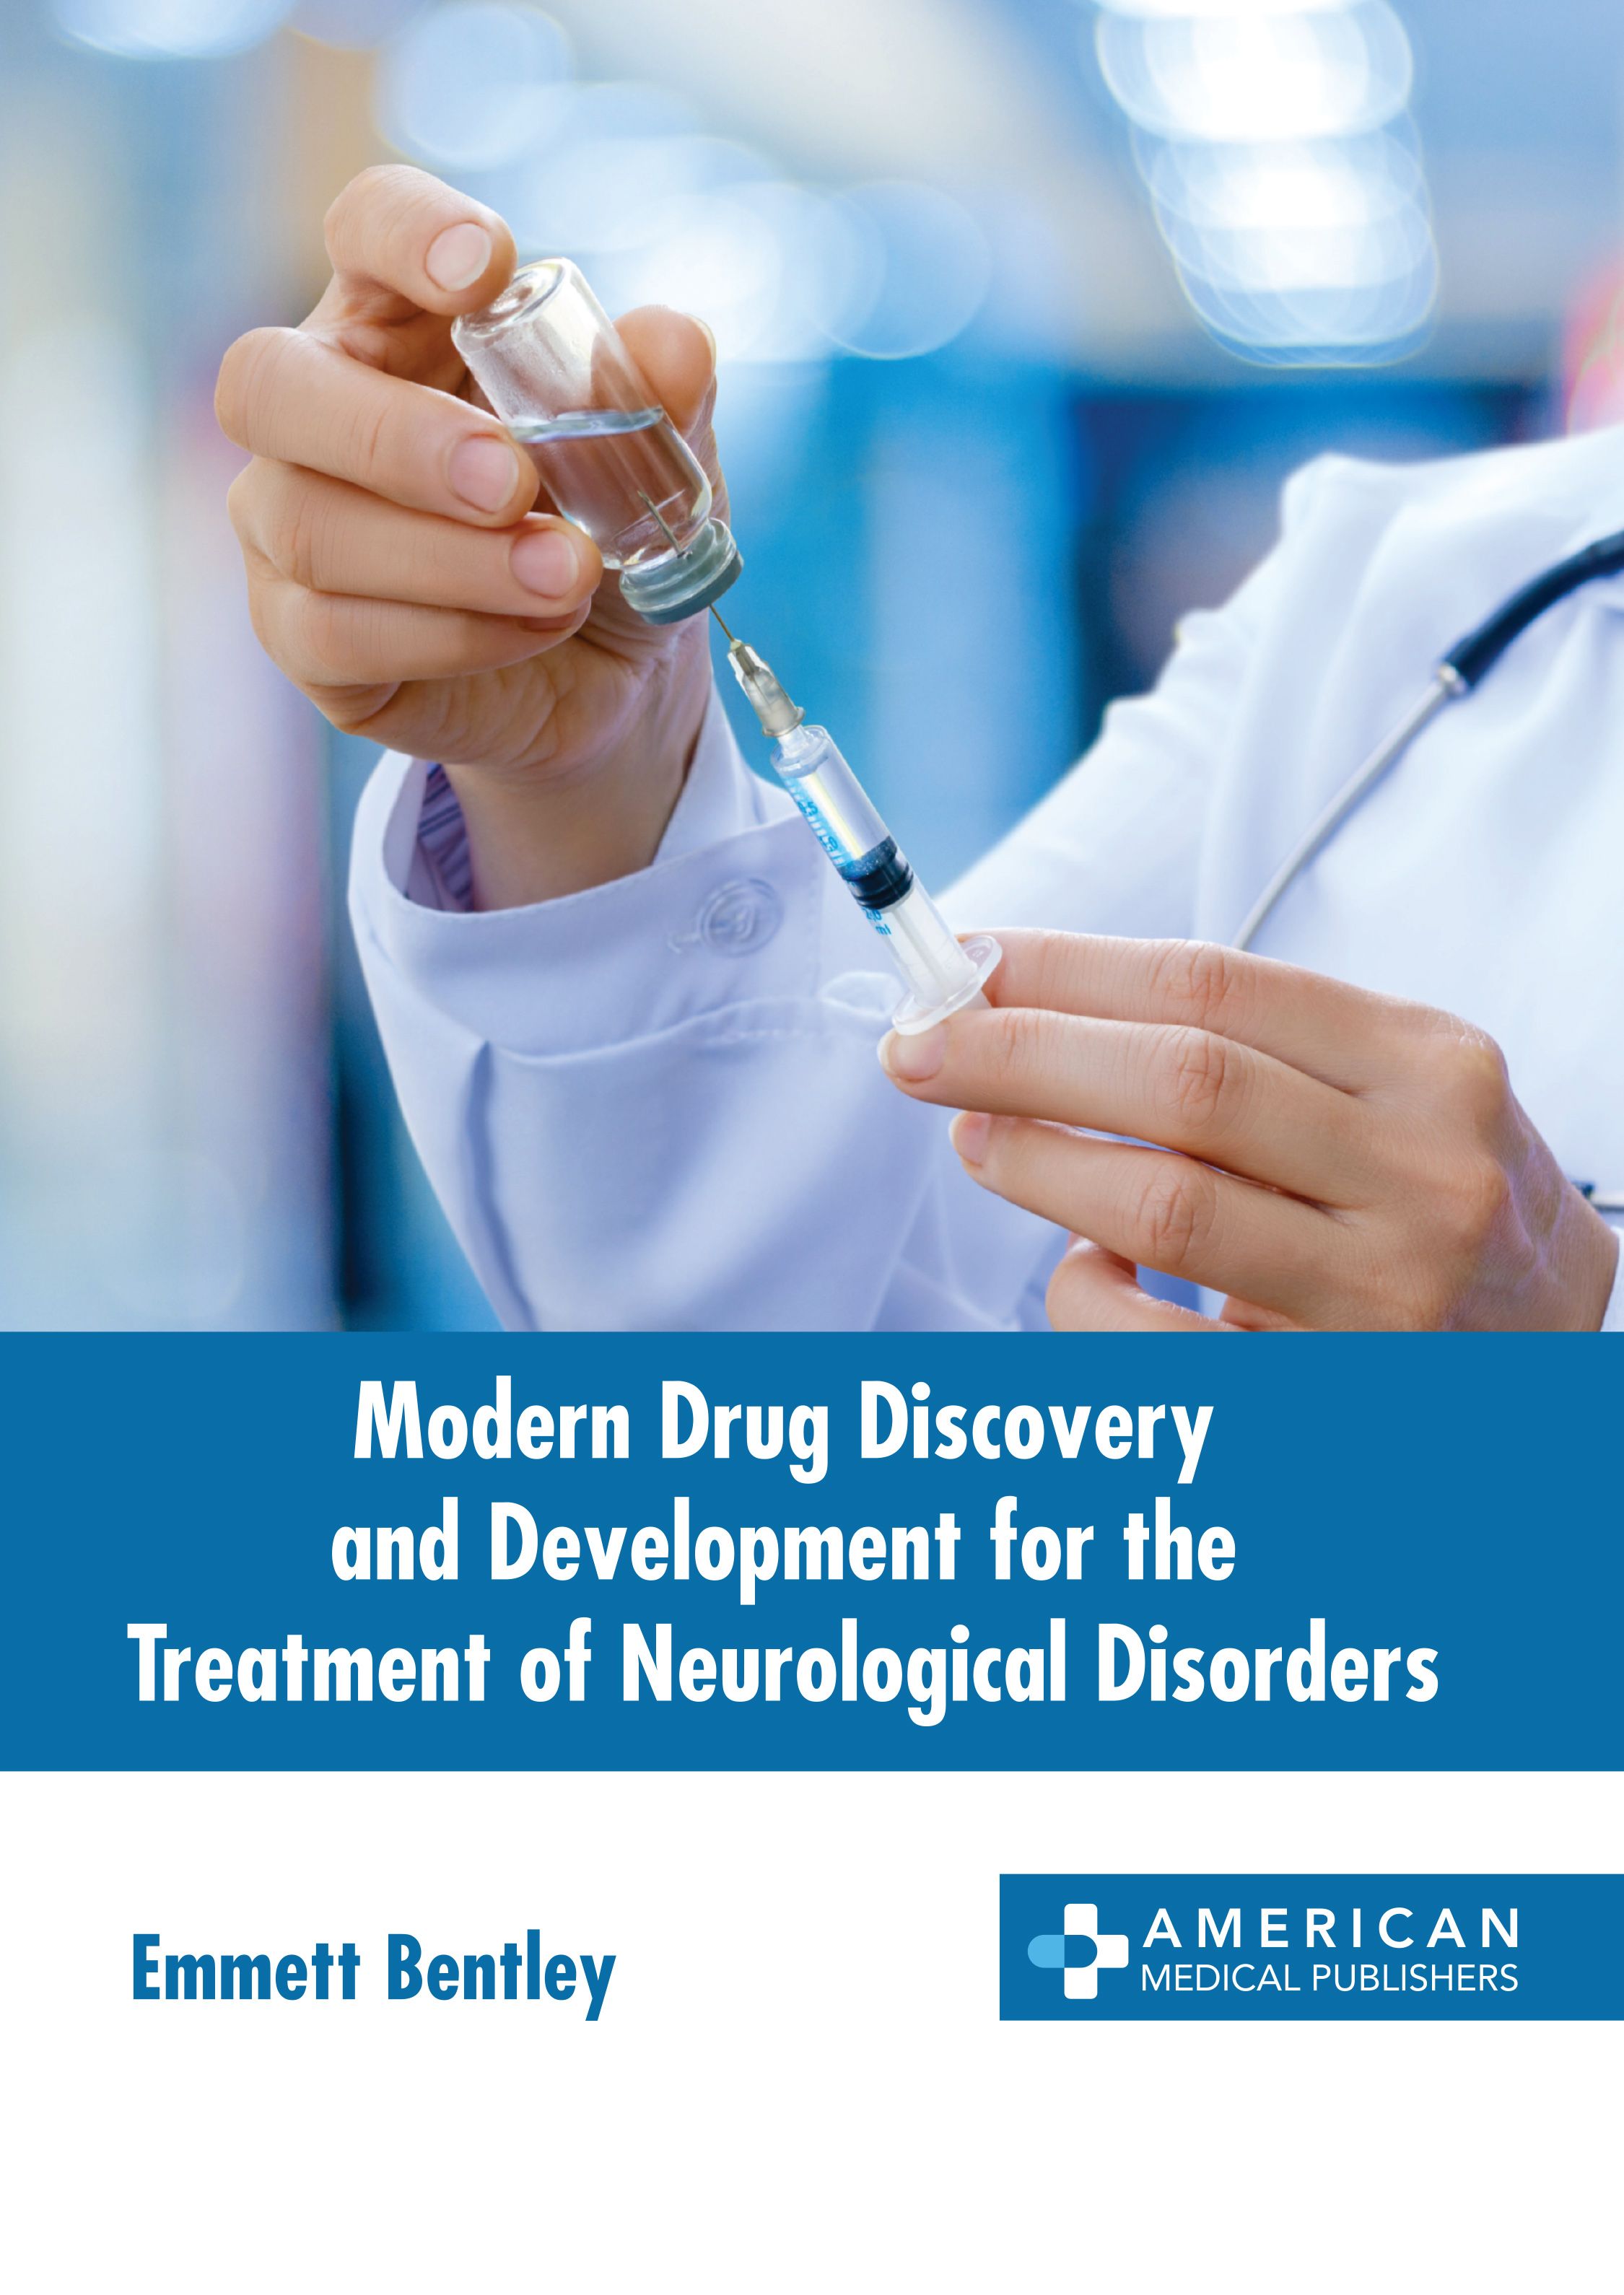 

exclusive-publishers/american-medical-publishers/modern-drug-discovery-and-development-for-the-treatment-of-neurological-disorders-9798887402741